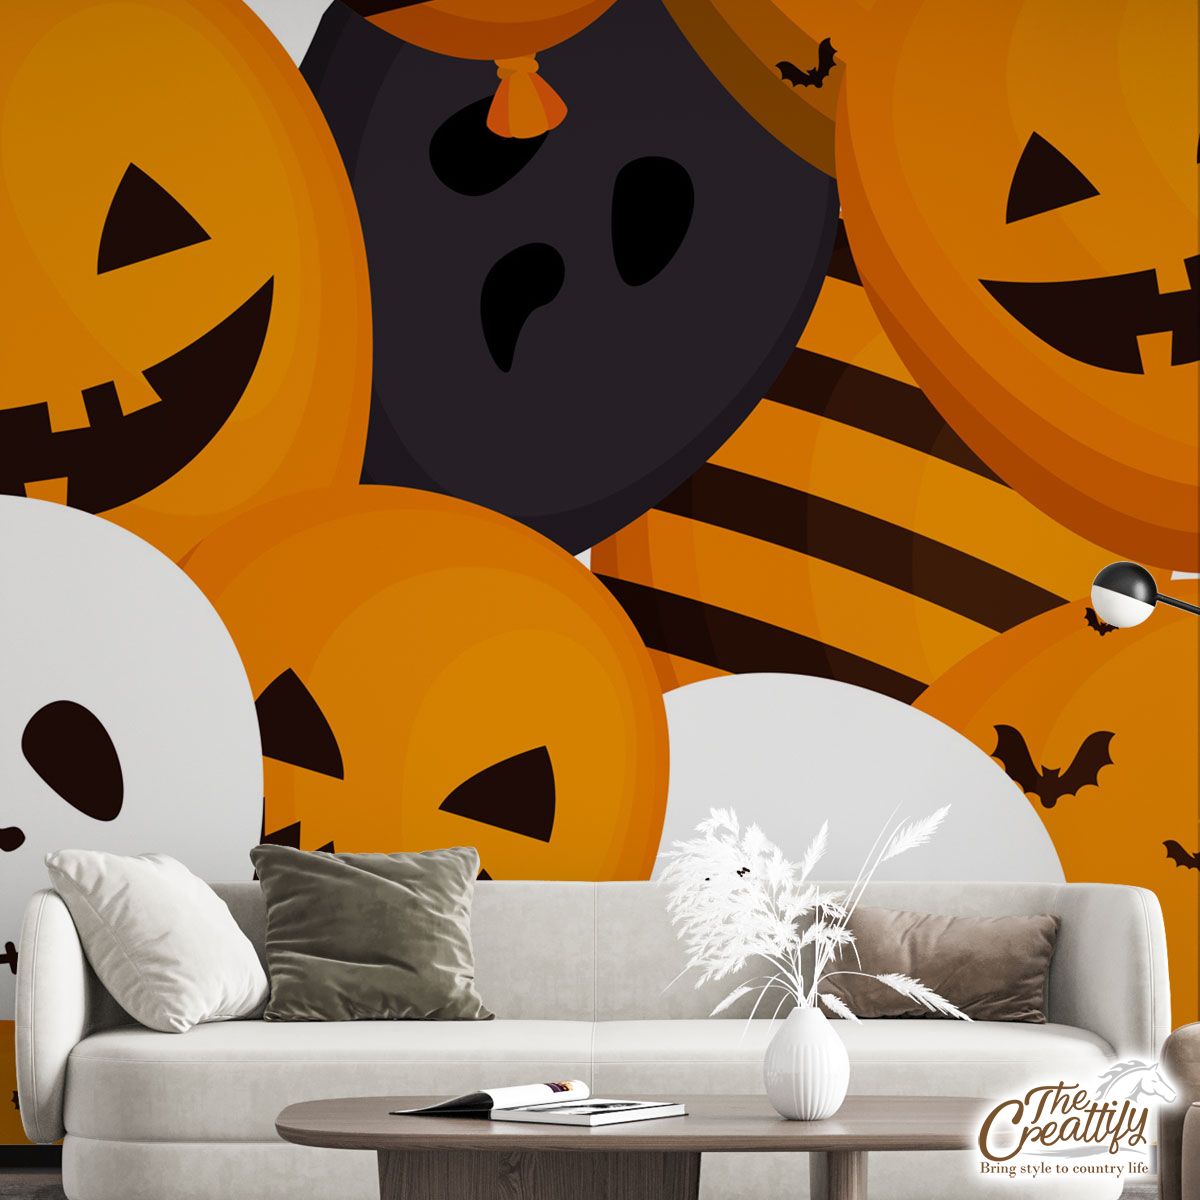 Halloween Balloons With Scary Faces Wall Mural